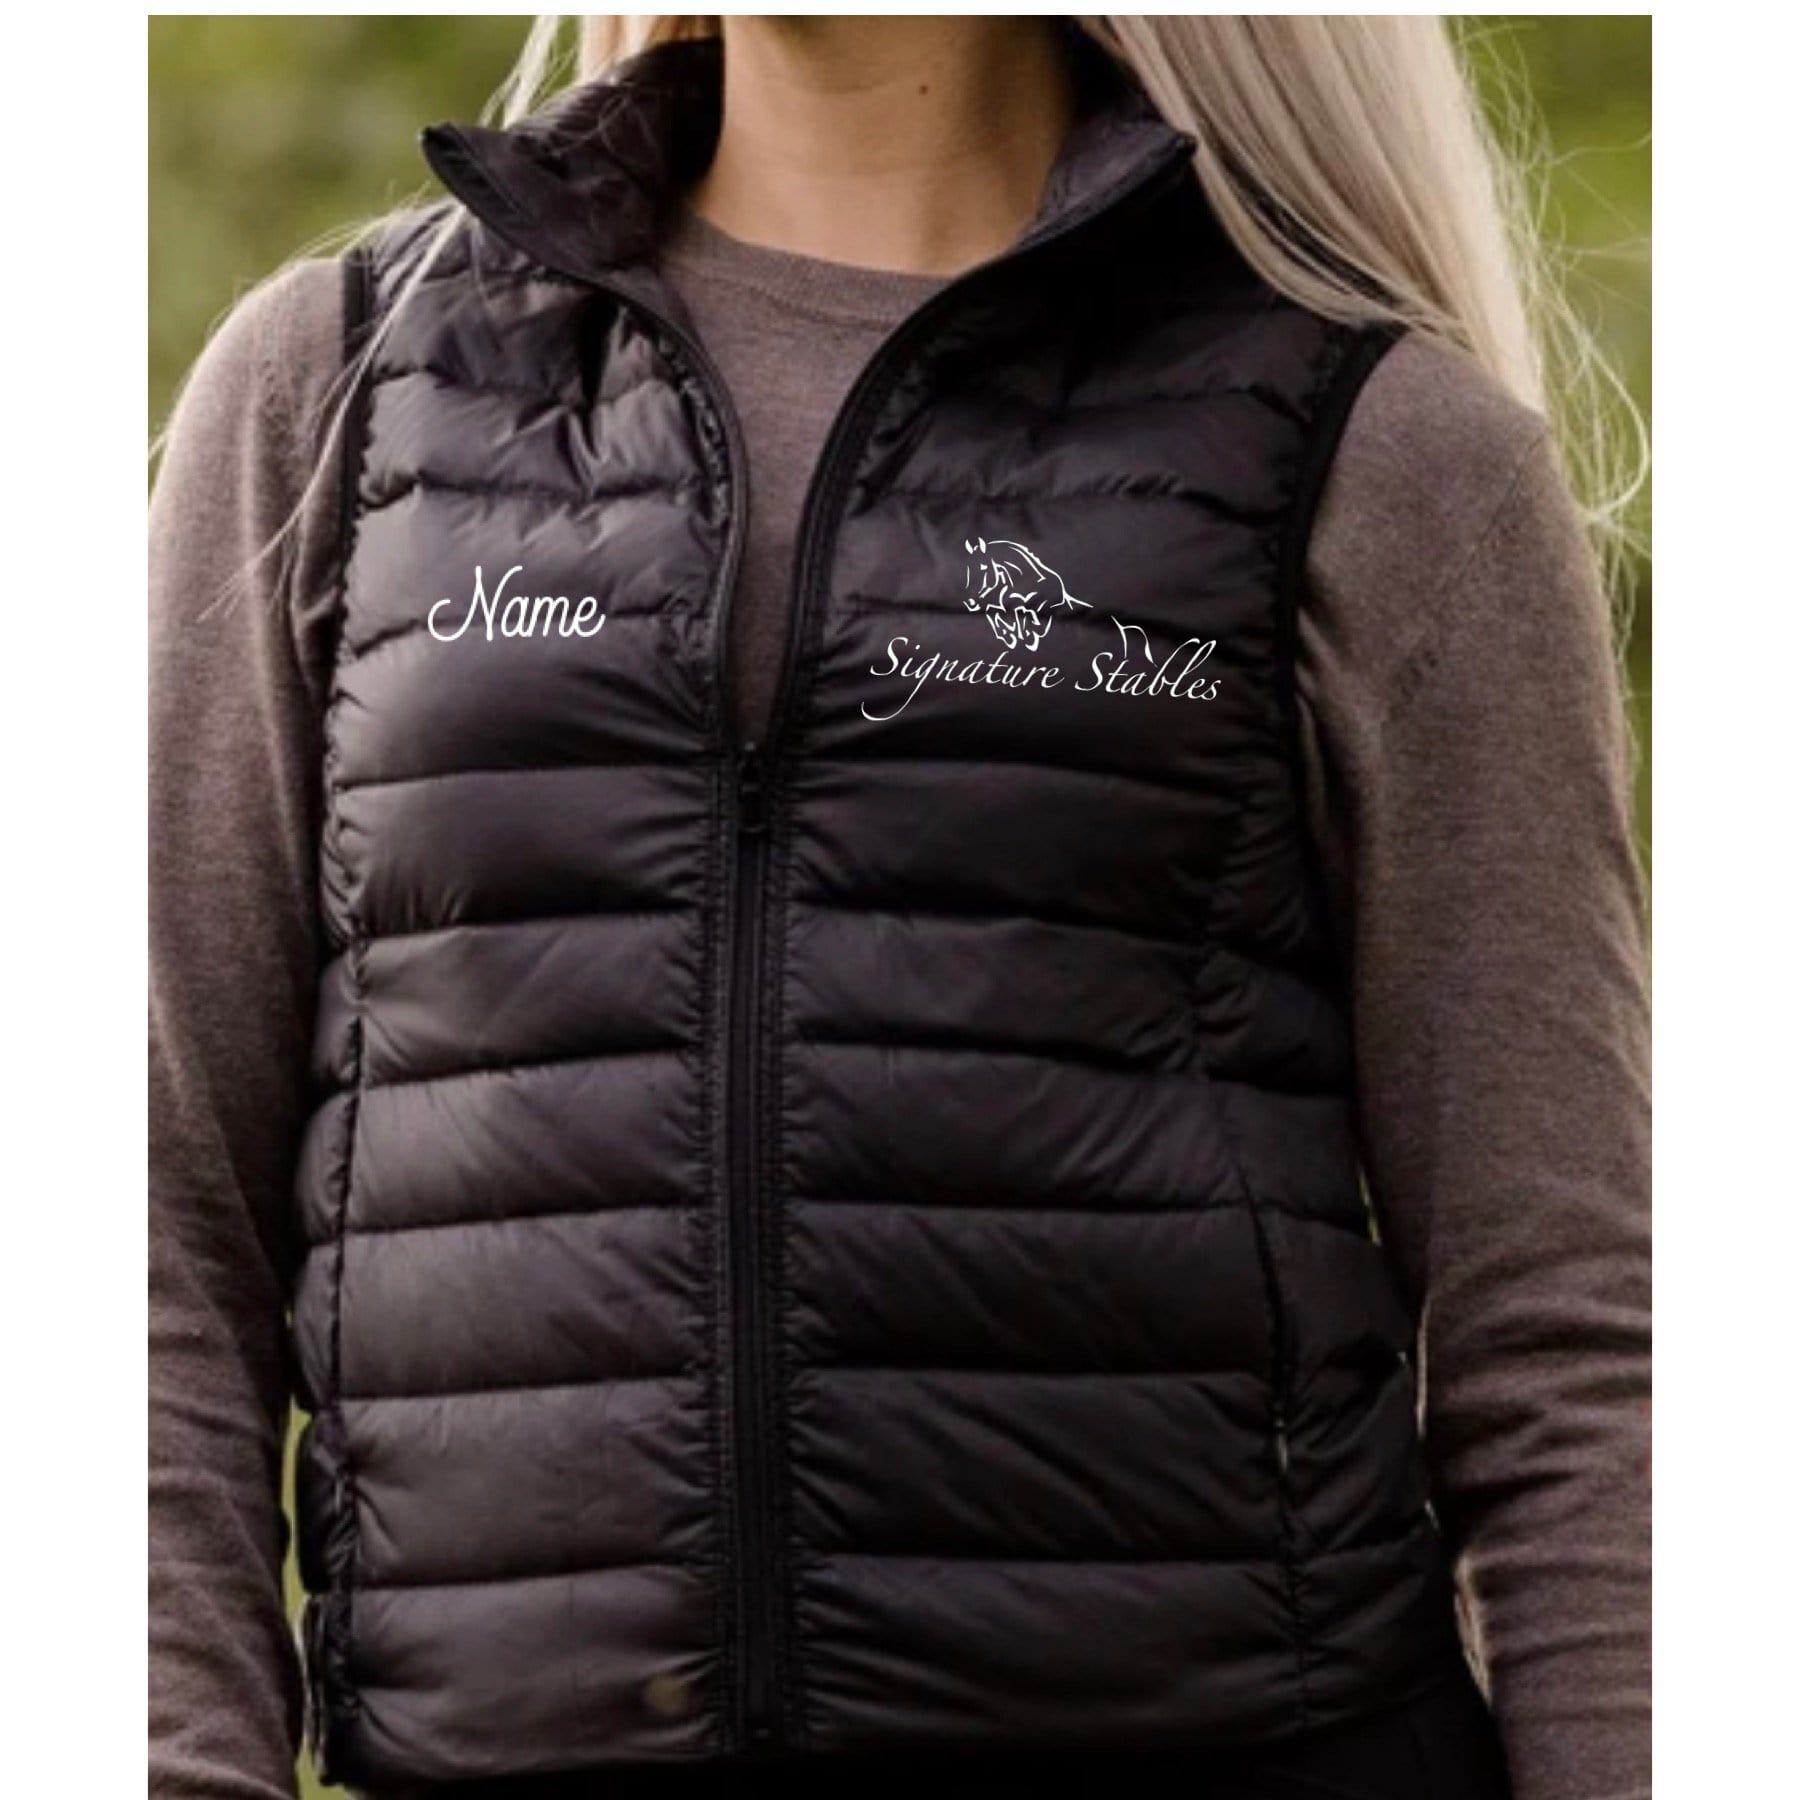 Equestrian Team Apparel Signature Stables Puffy Vests equestrian team apparel online tack store mobile tack store custom farm apparel custom show stable clothing equestrian lifestyle horse show clothing riding clothes horses equestrian tack store